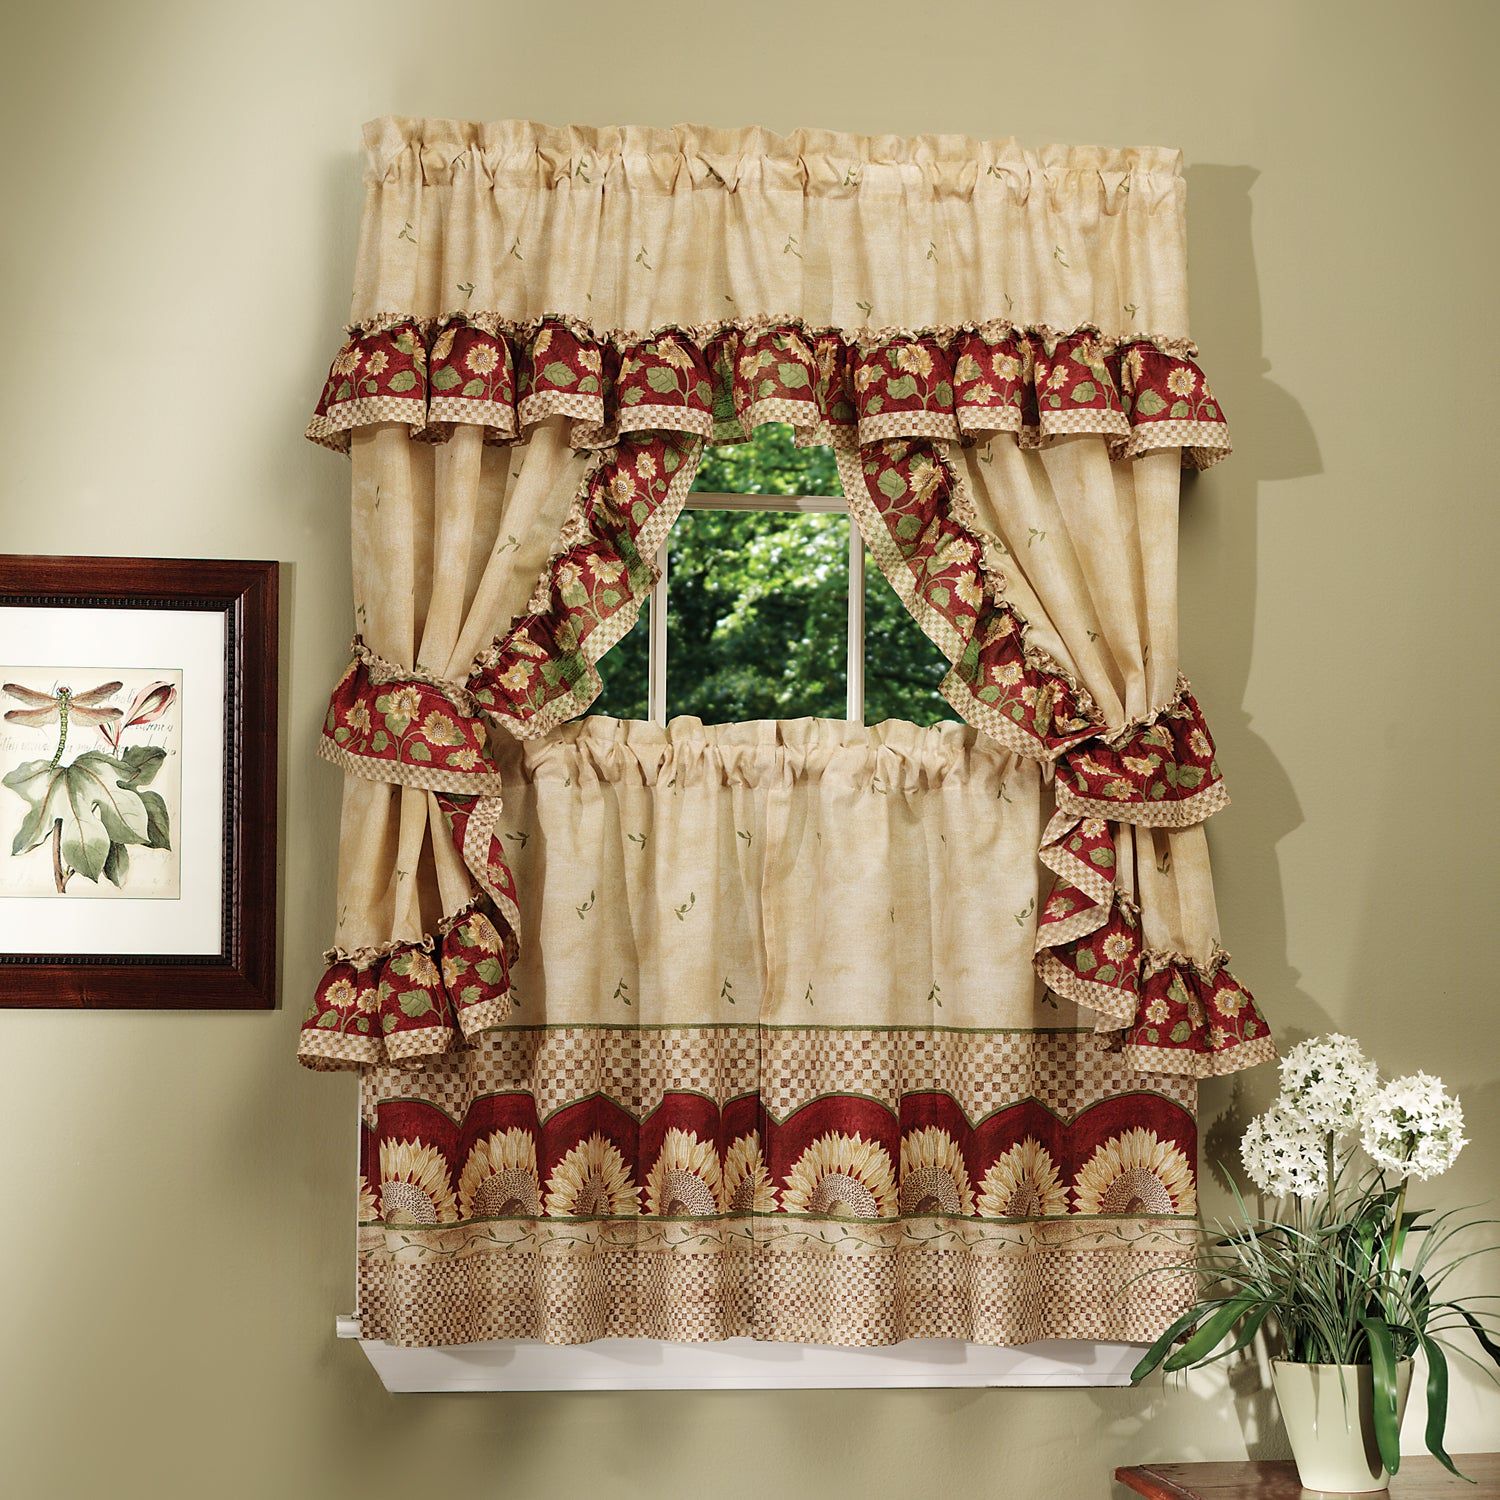 Complete Cottage Curtain Set With A Country Style Sunflower Print – 36 Inch Intended For Window Curtains Sets With Colorful Marketplace Vegetable And Sunflower Print (View 2 of 20)